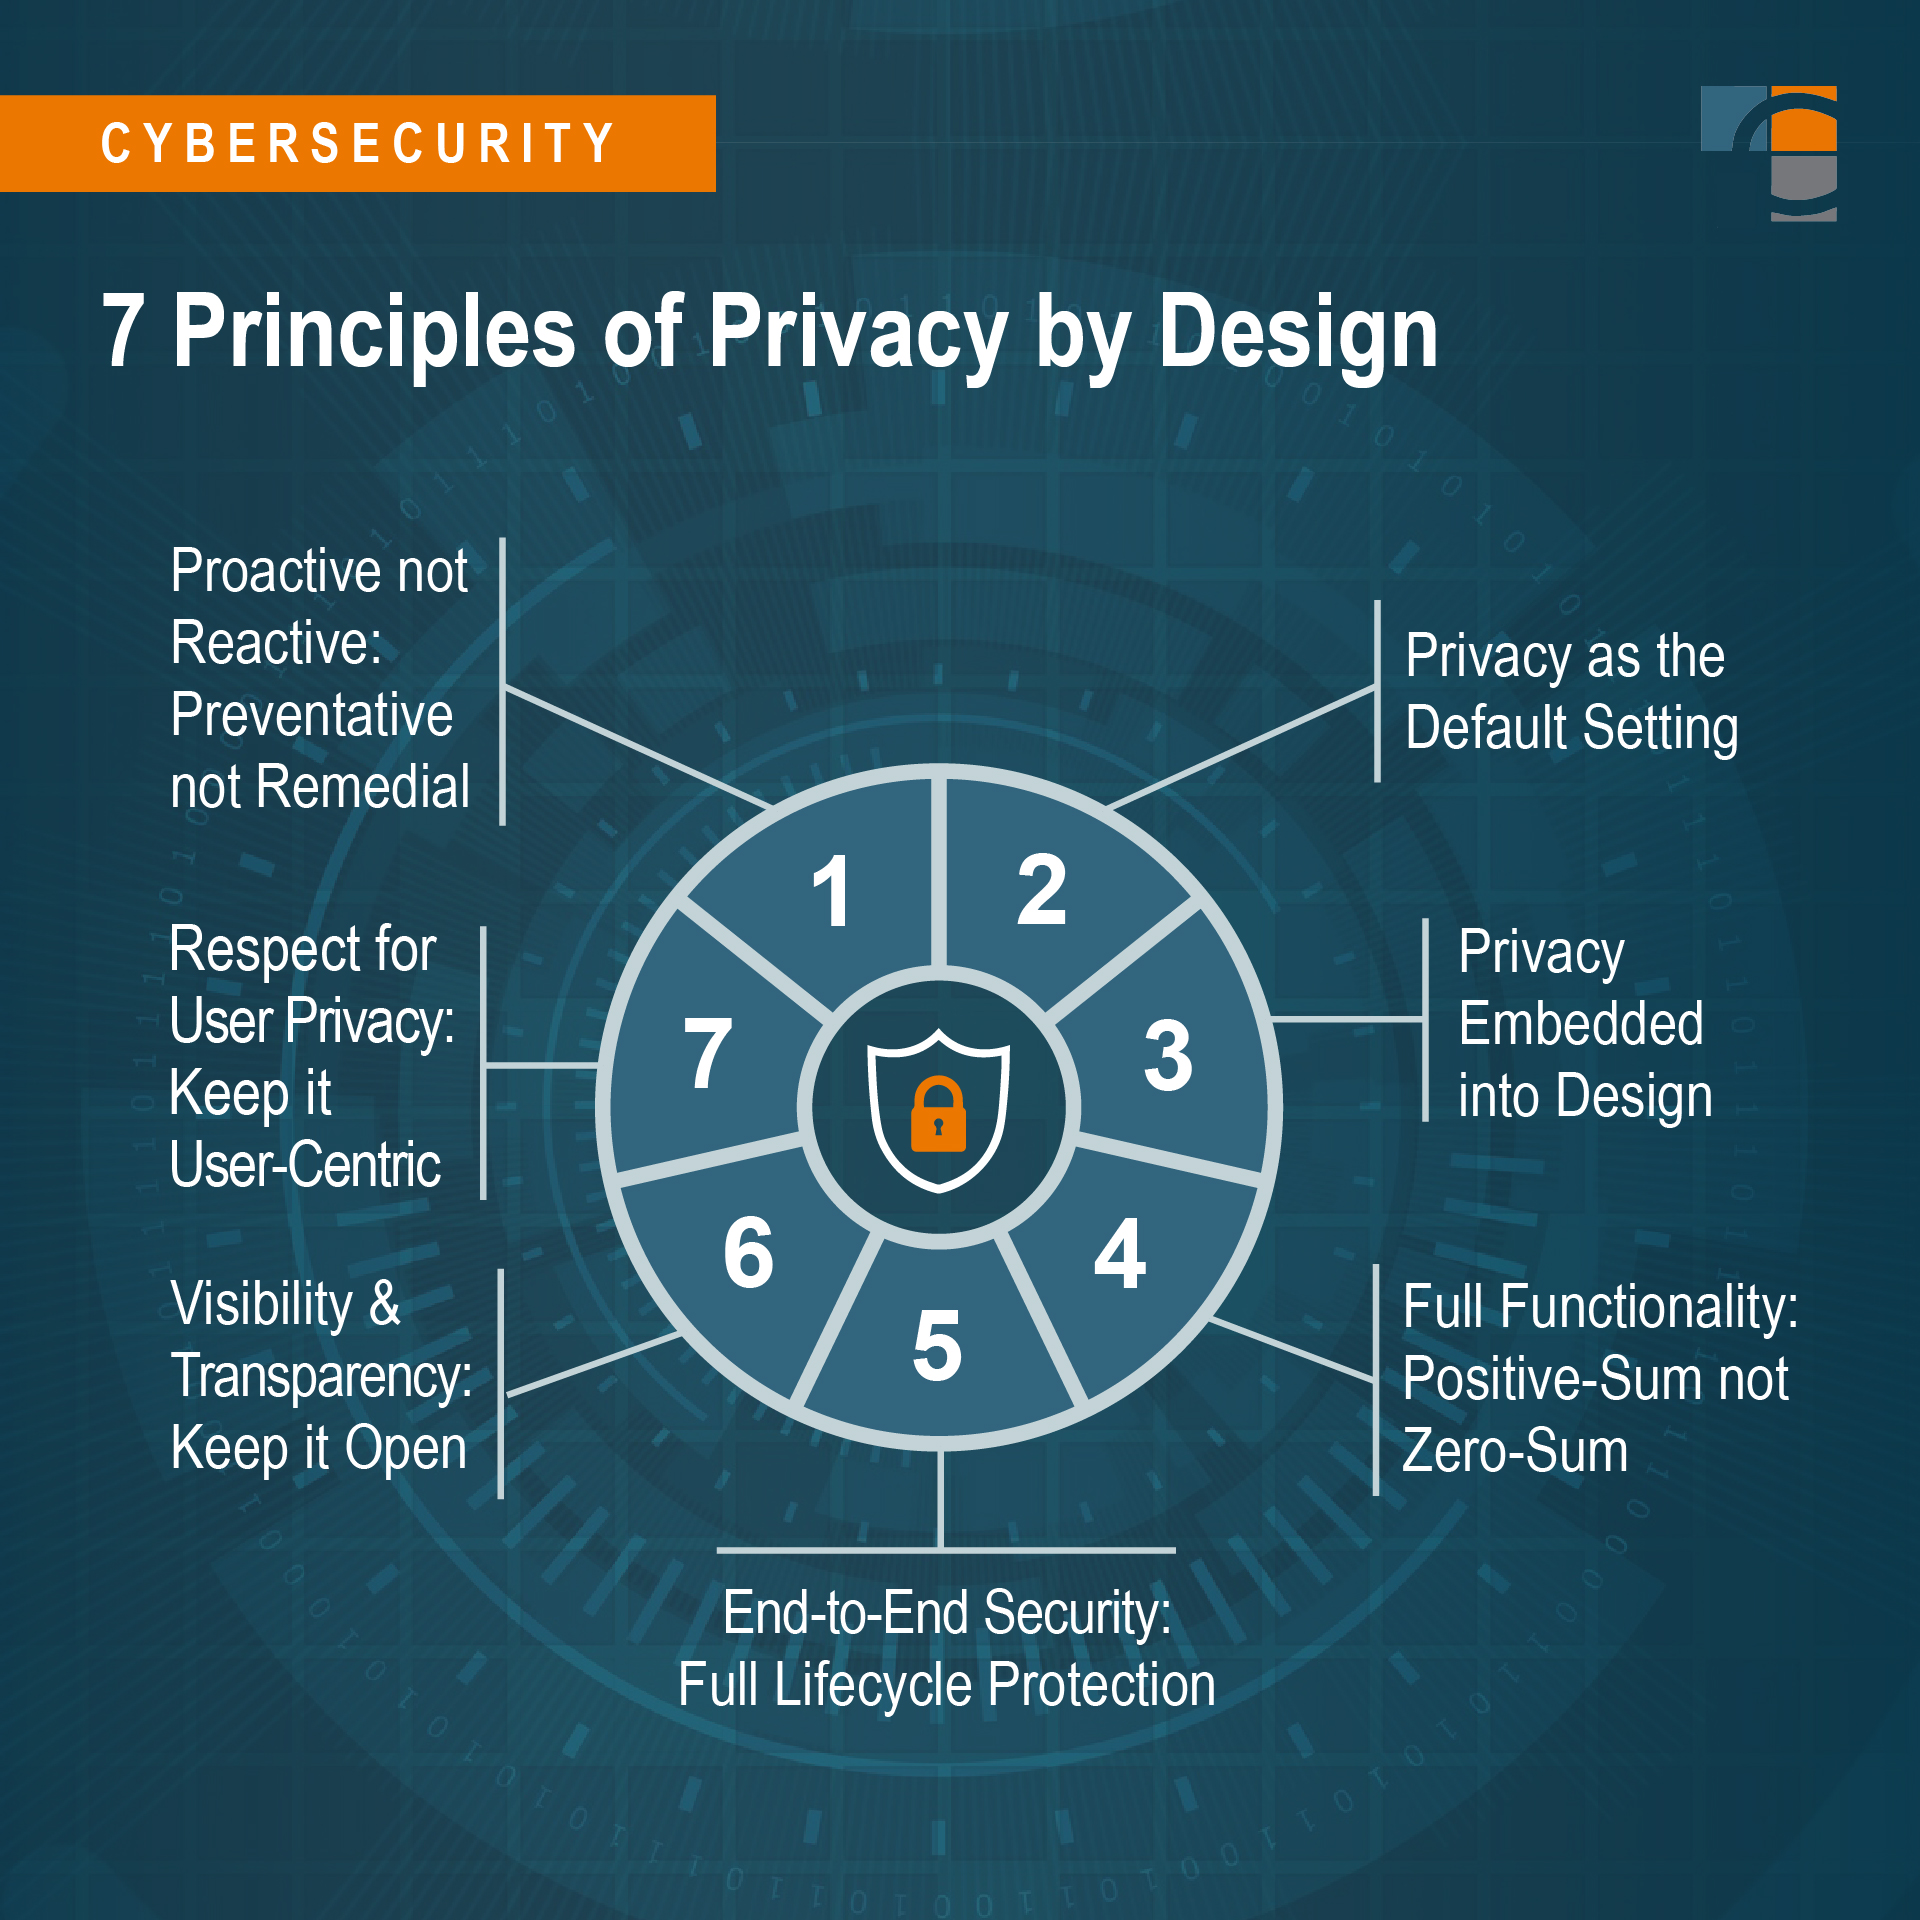 benefits of privacy by design principles